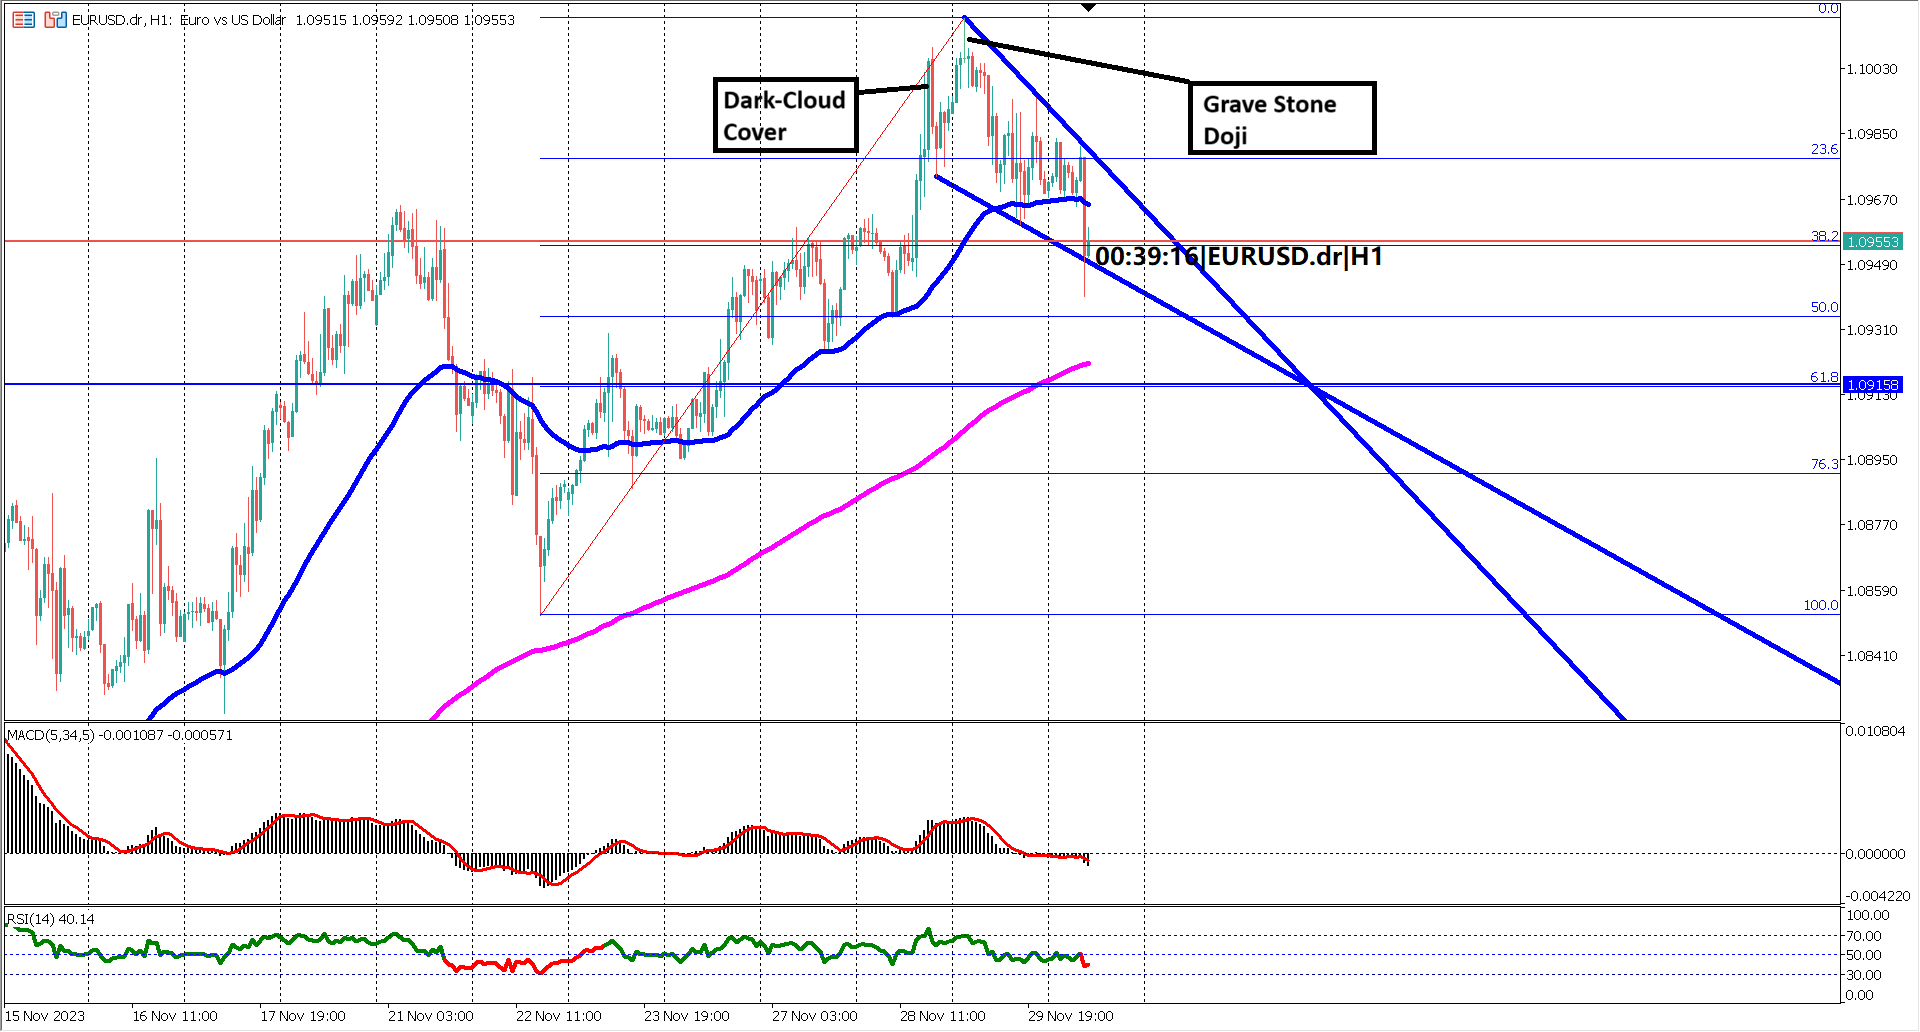 EURUSD Treads a Tightrope: Economic Figures and Technical Patterns Signal Market Shifts